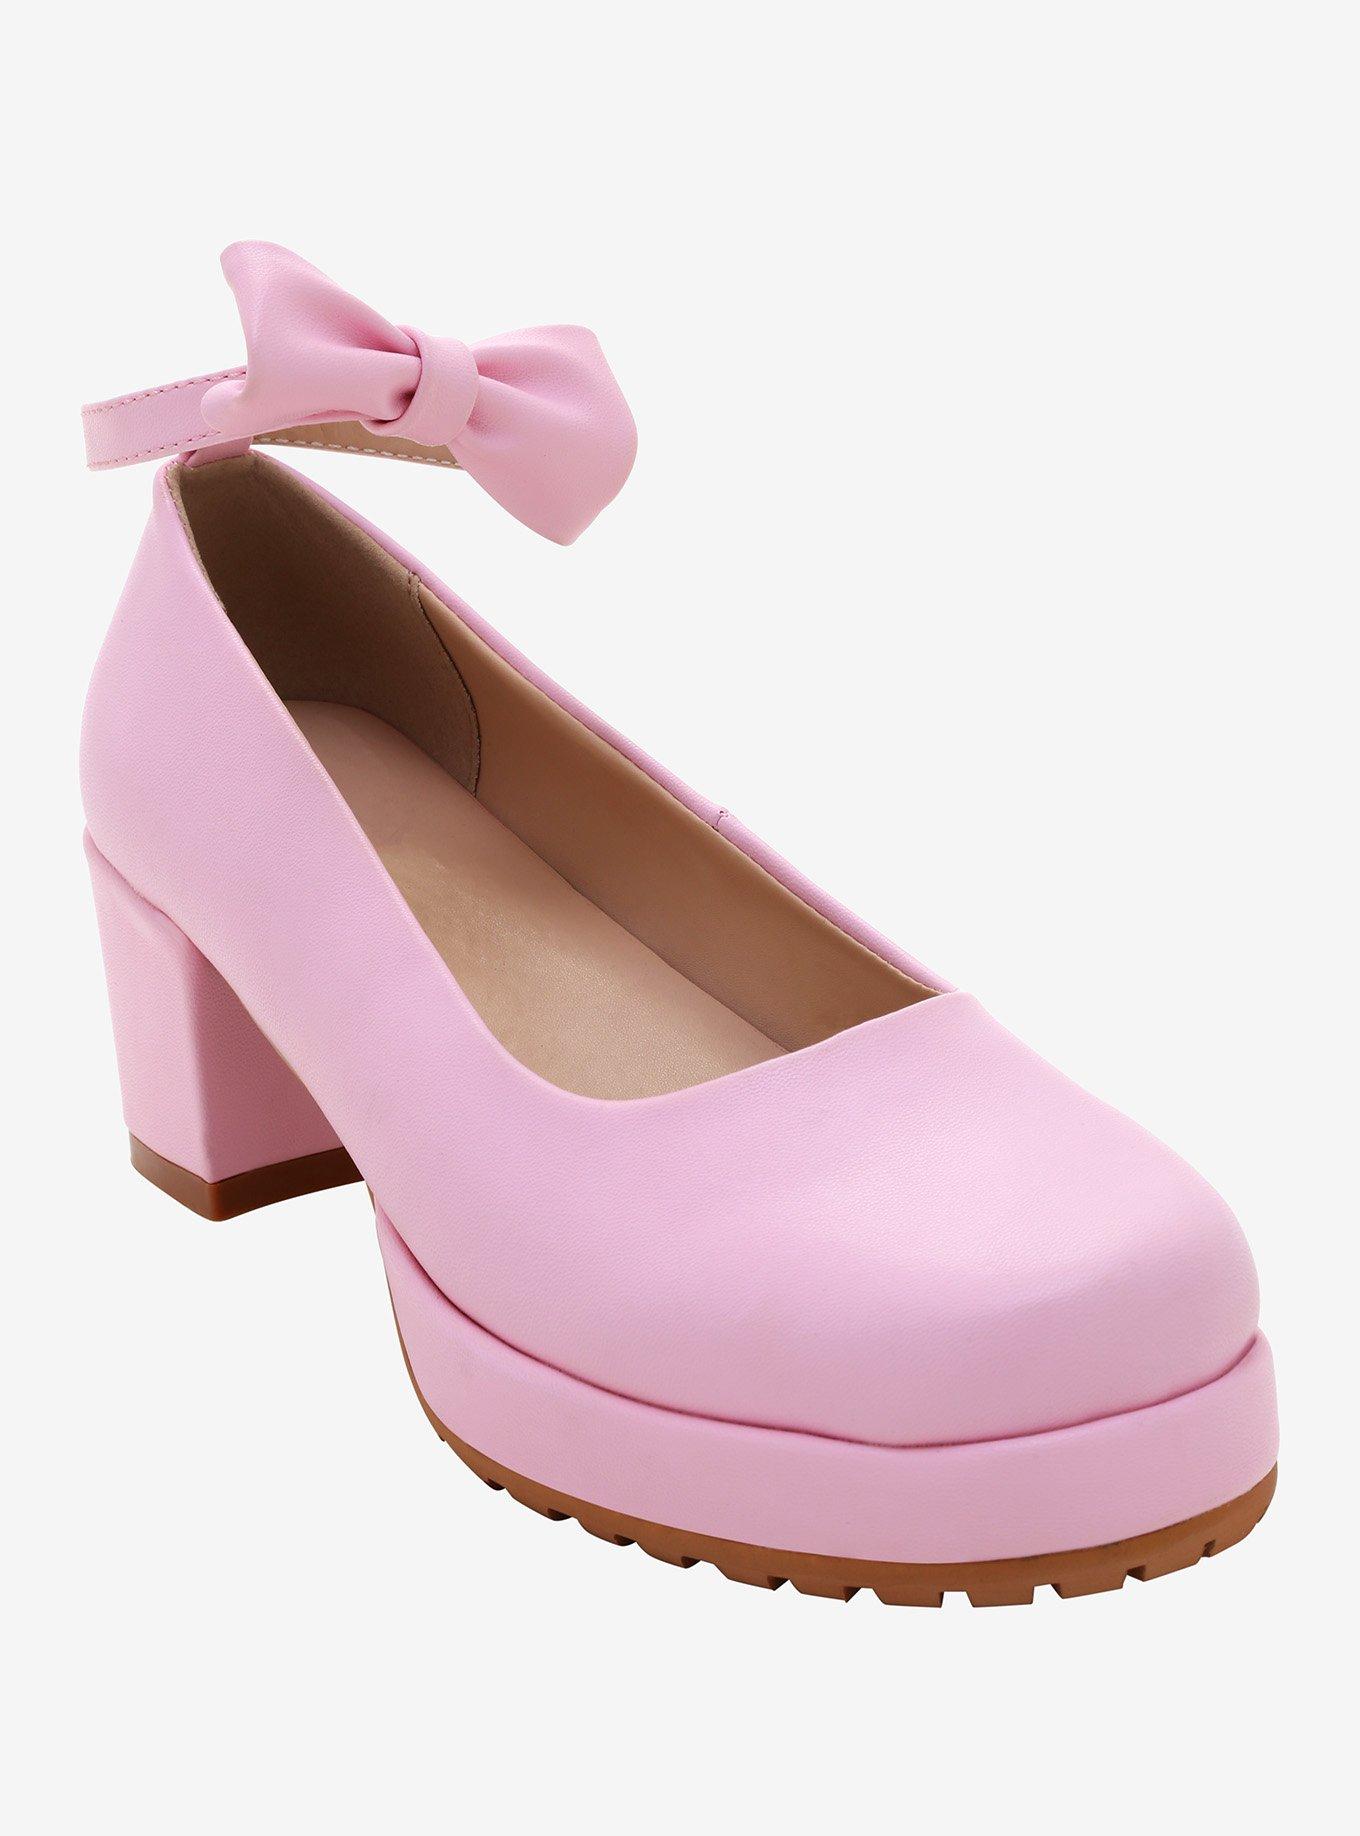 Pink Ankle Strap & Bow Heeled Mary Janes, PINK, hi-res